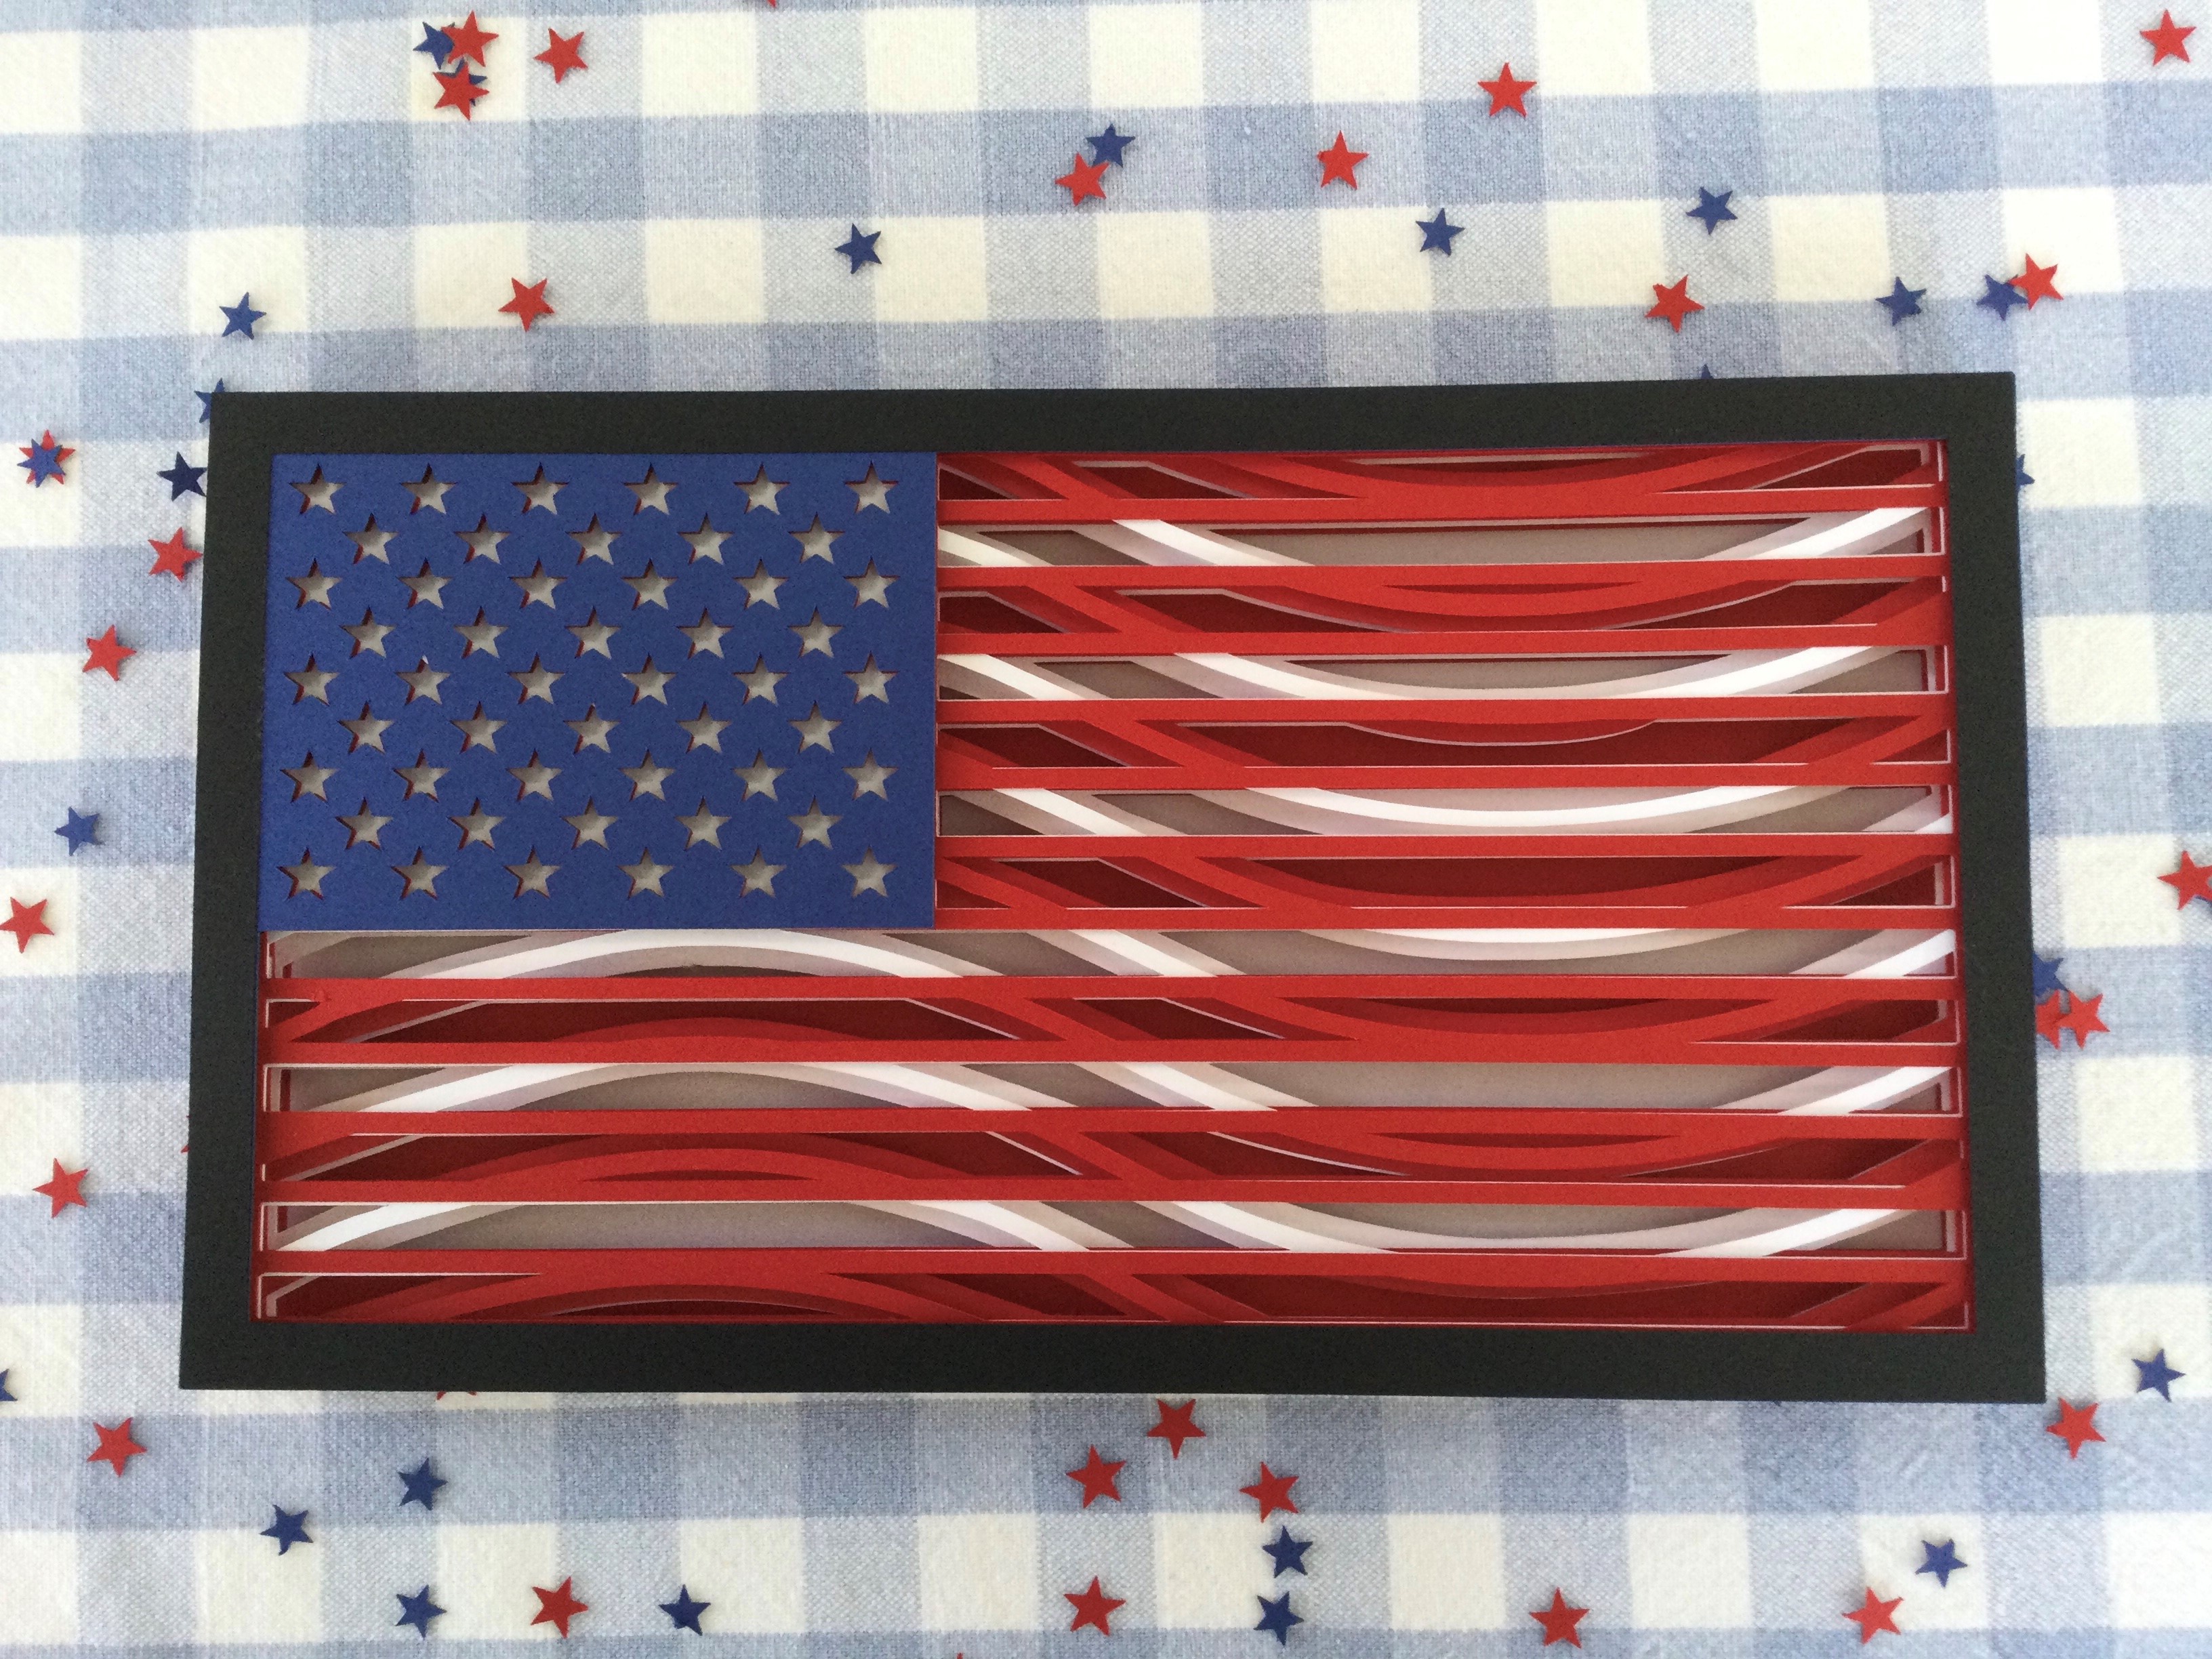 an American flag made out of cut paper.